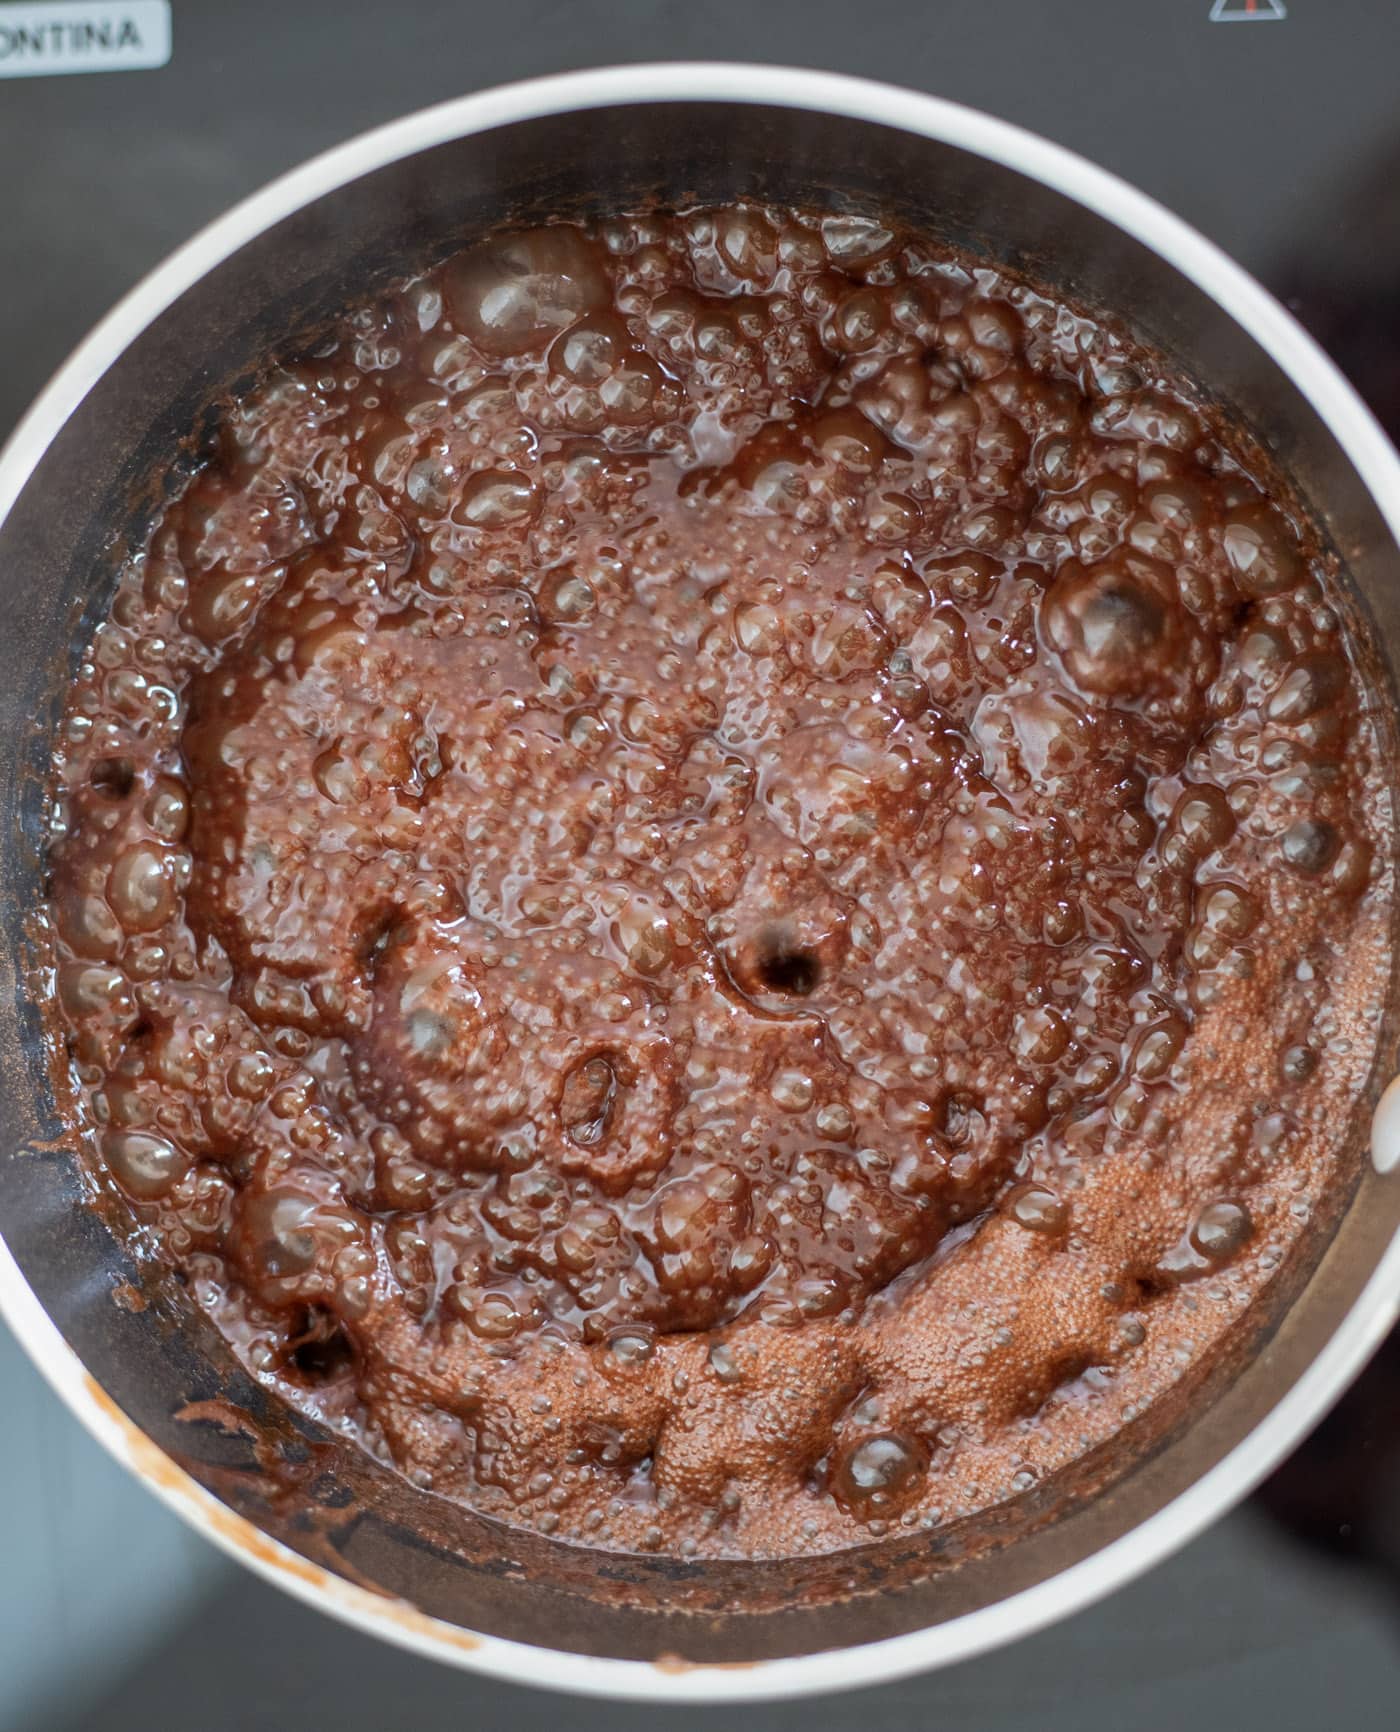 chocolate mixture at a rolling boil